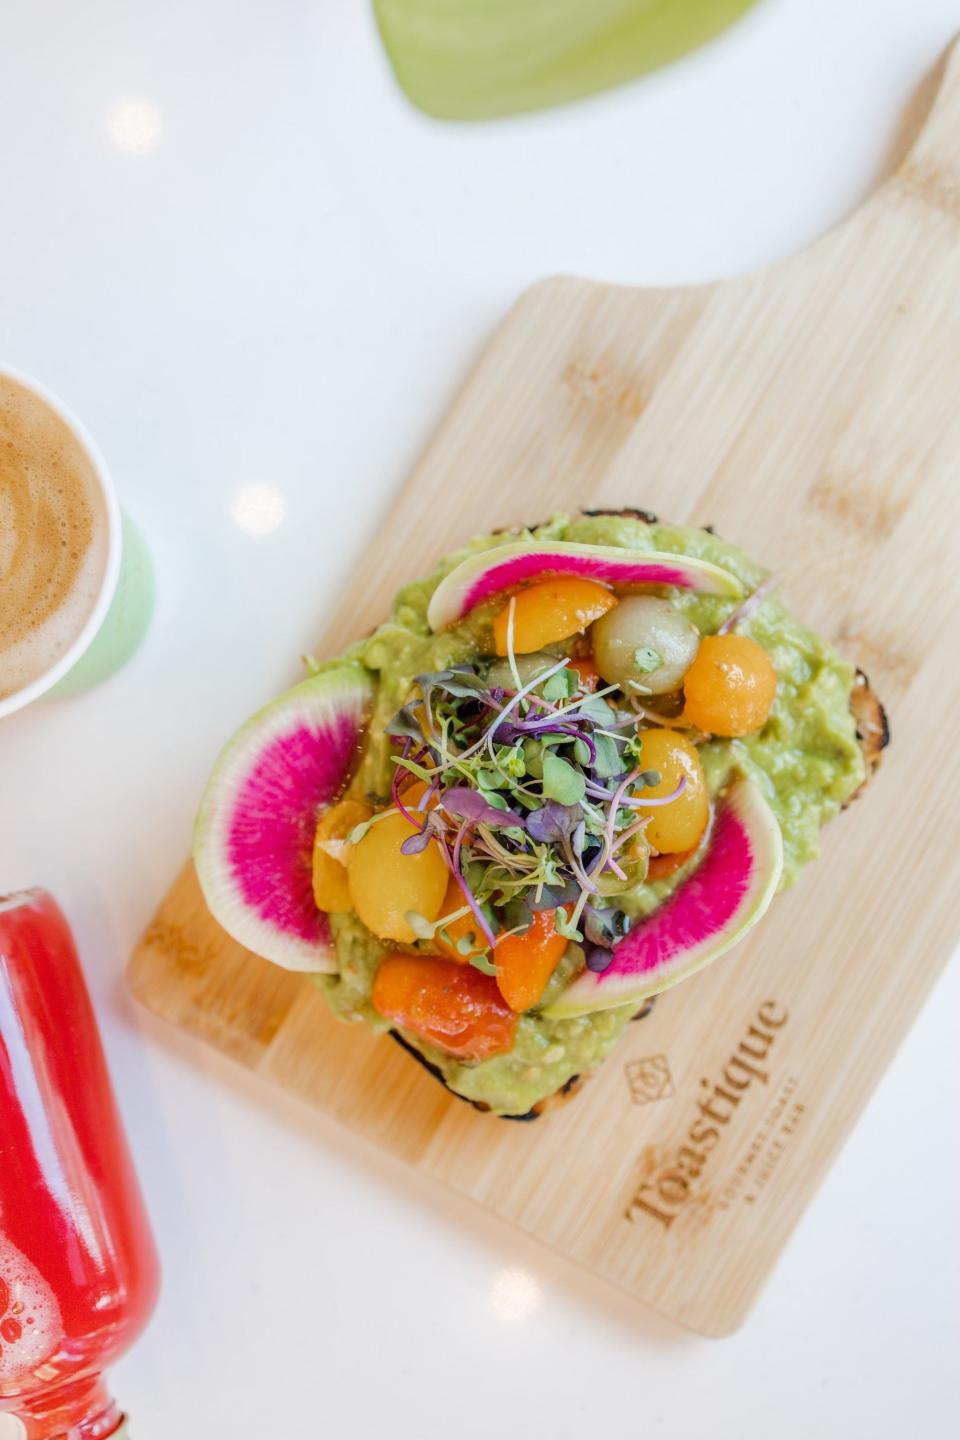 Avocado smash toast is the No. 1 bestselling item at Toastique